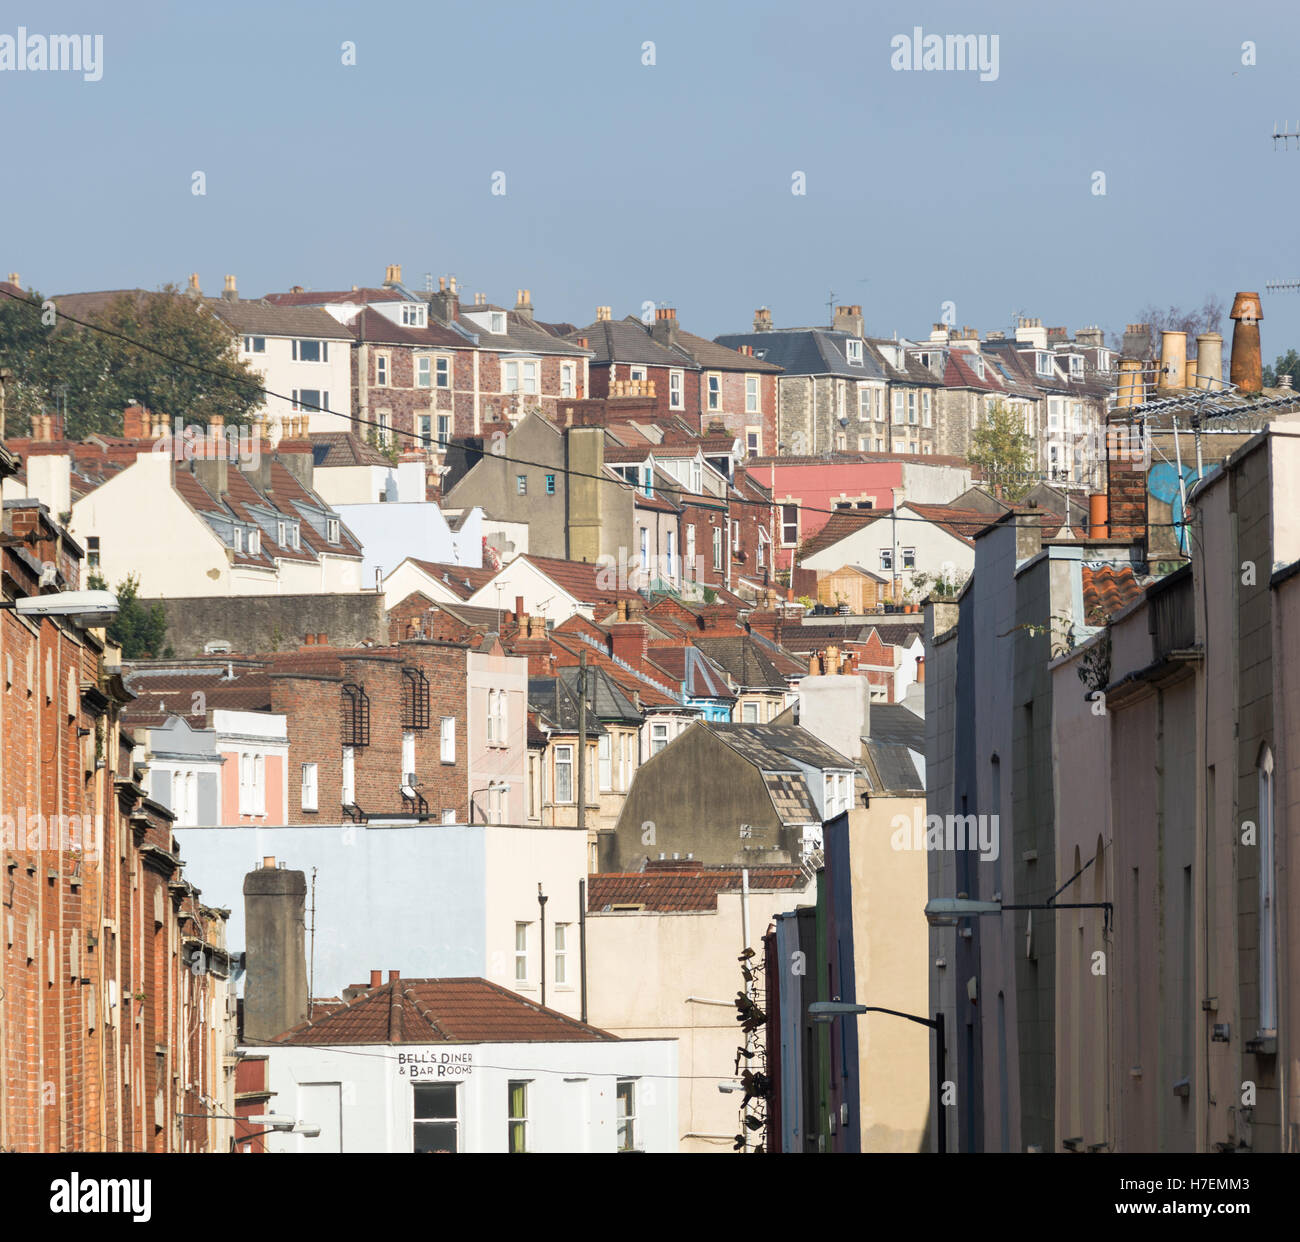 A view up Picton Street in Montpelier, Bristol. Looking towards the many layers of terraced housing. Stock Photo